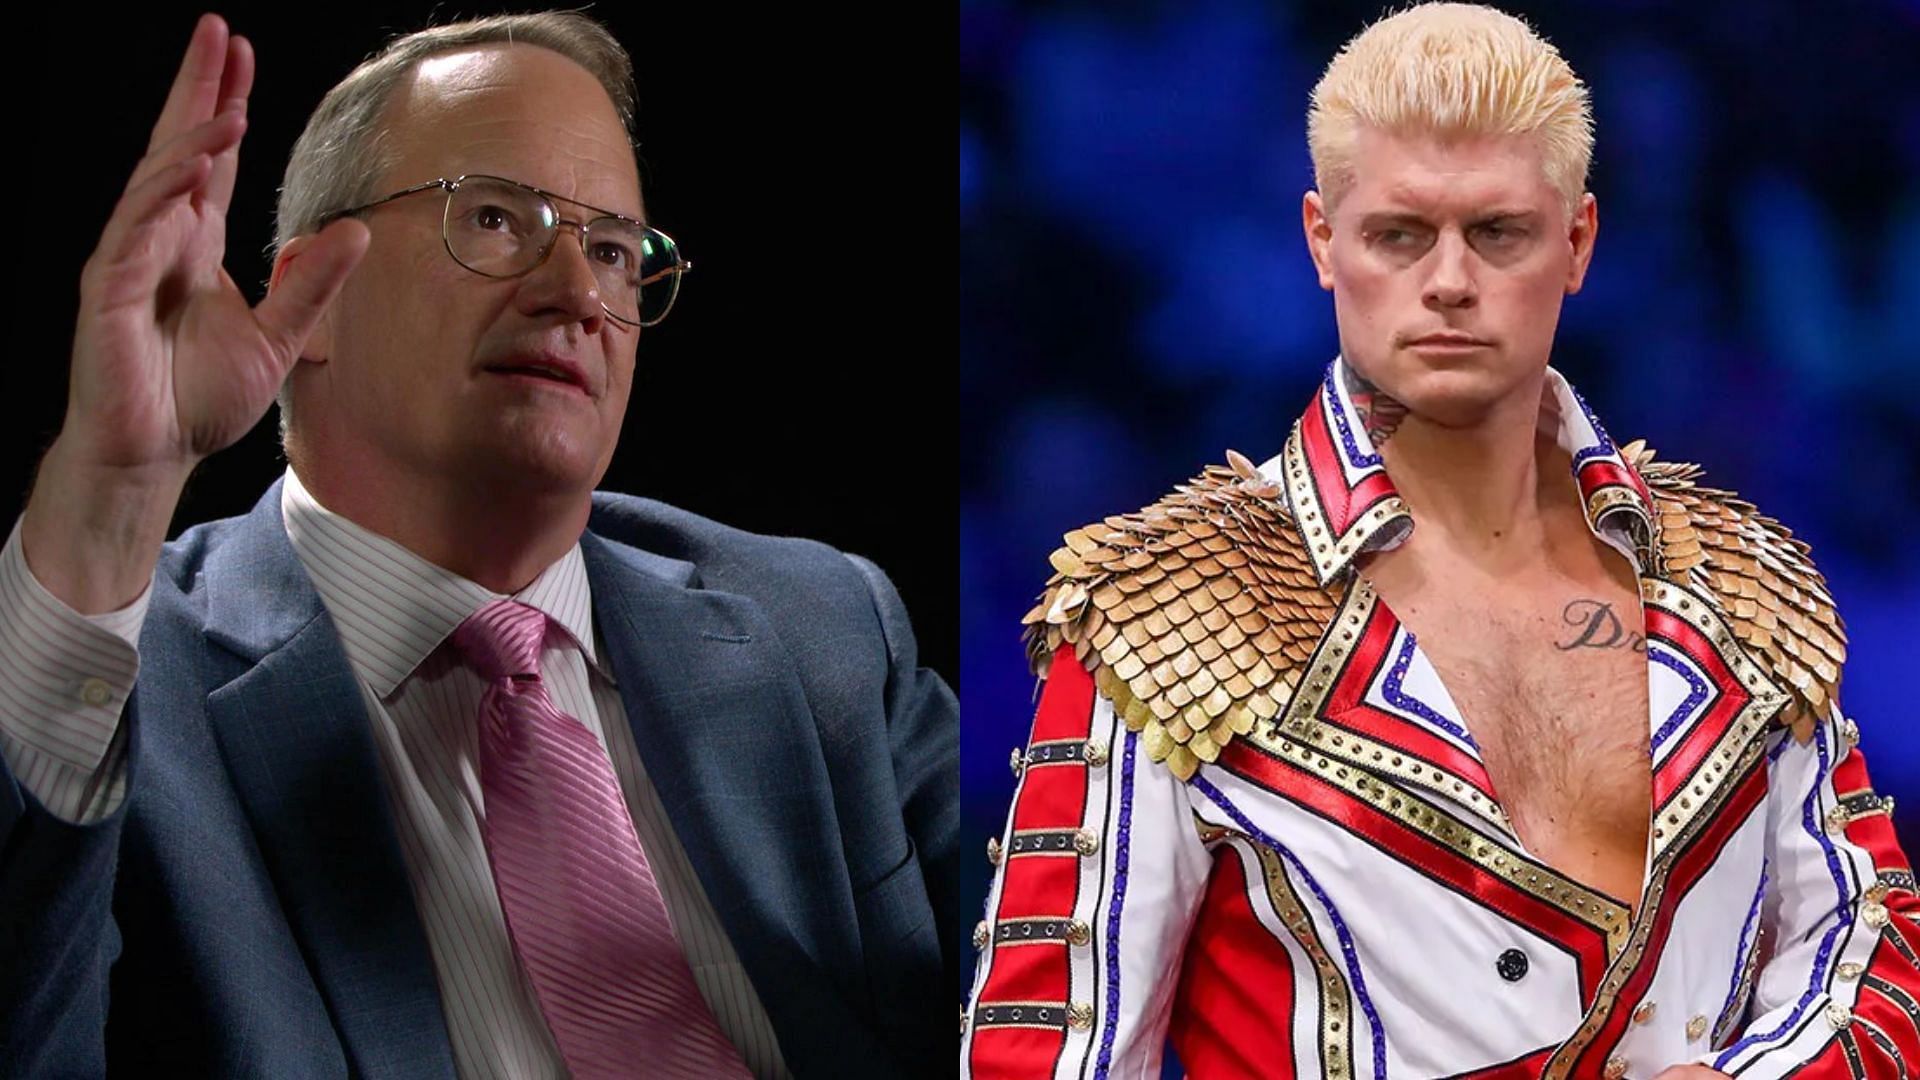 Should Cody Rhodes have been ranked higher?